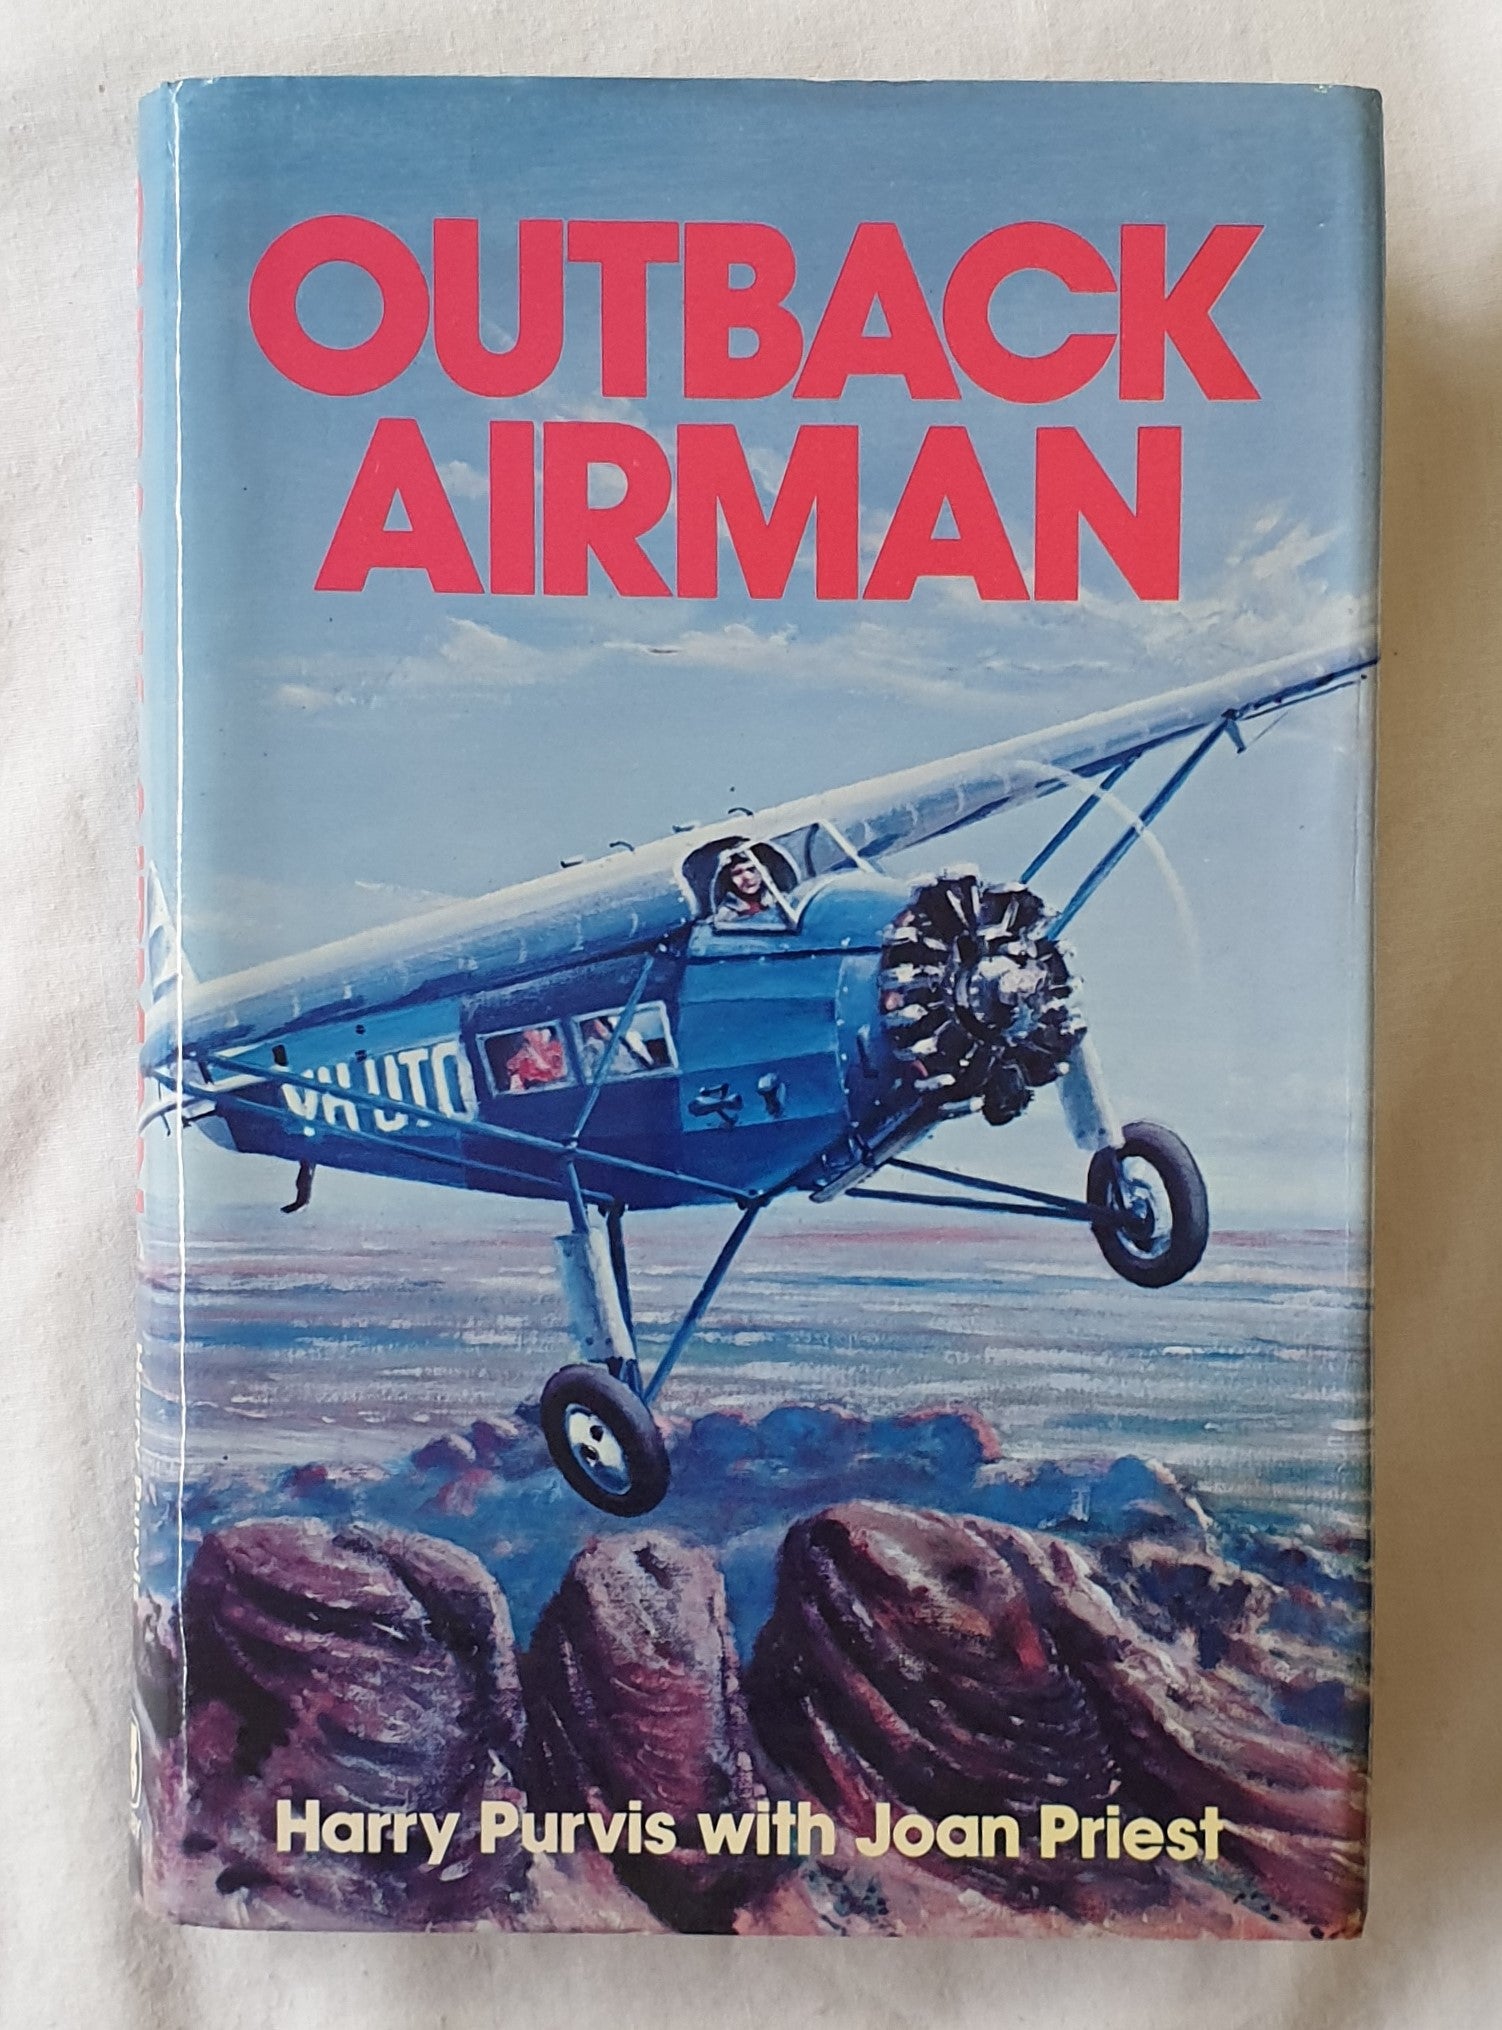 Outback Airman  by Harry Purvis with Joan Priest